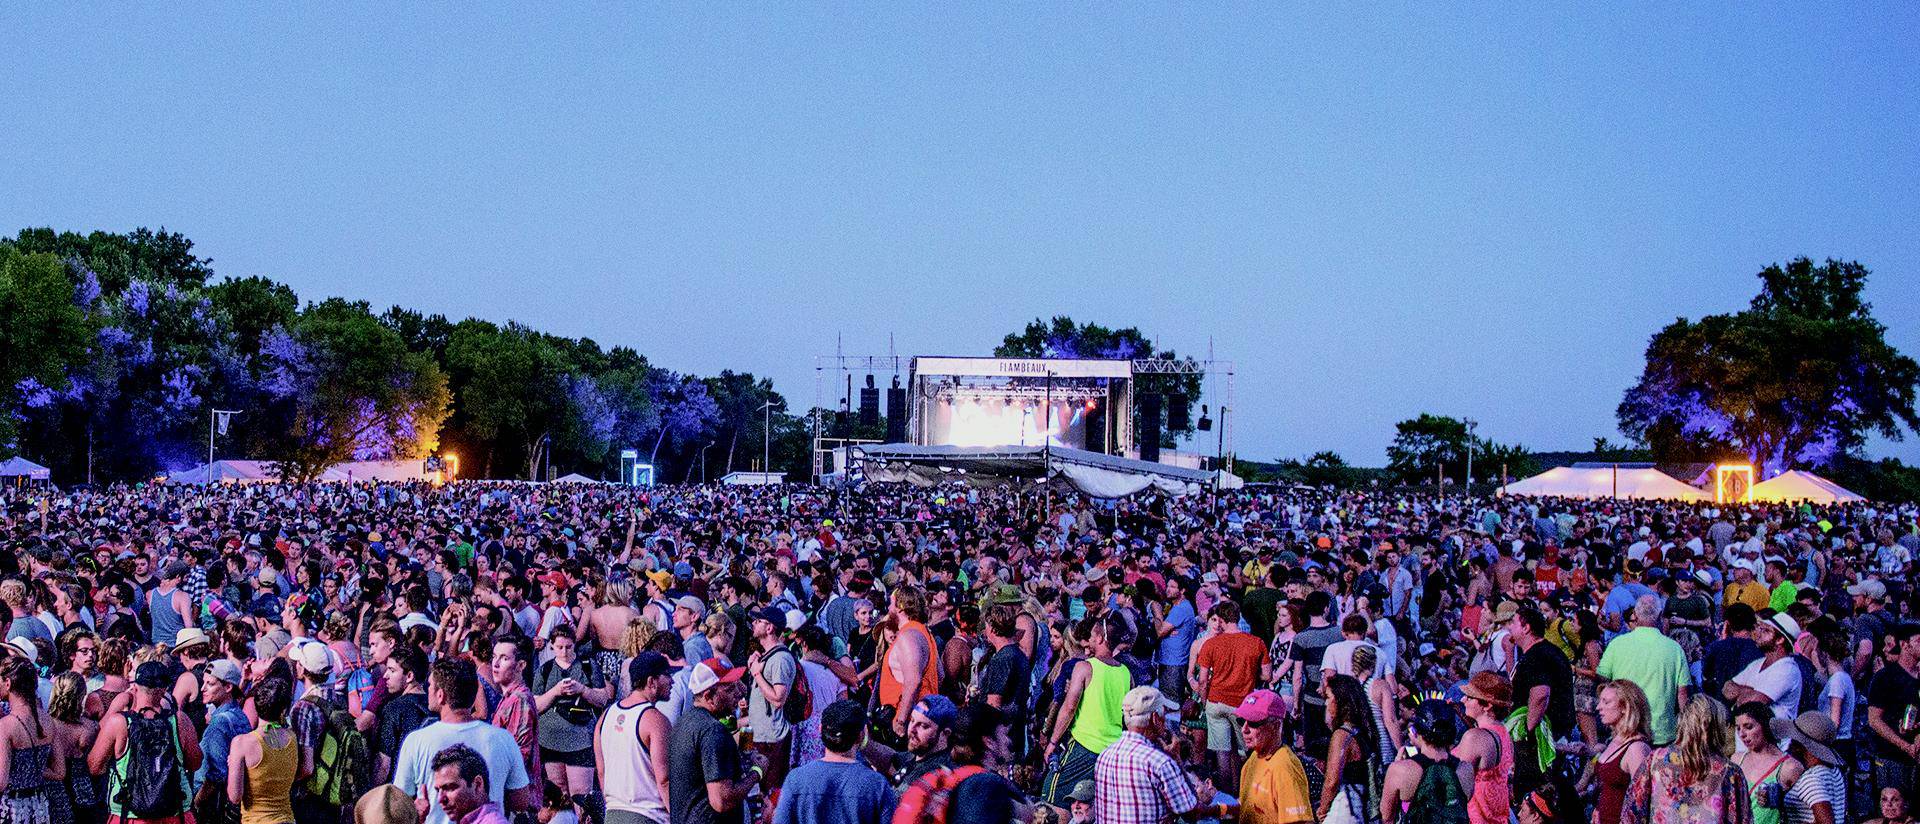 Thousands wend their way to Eaux Claires